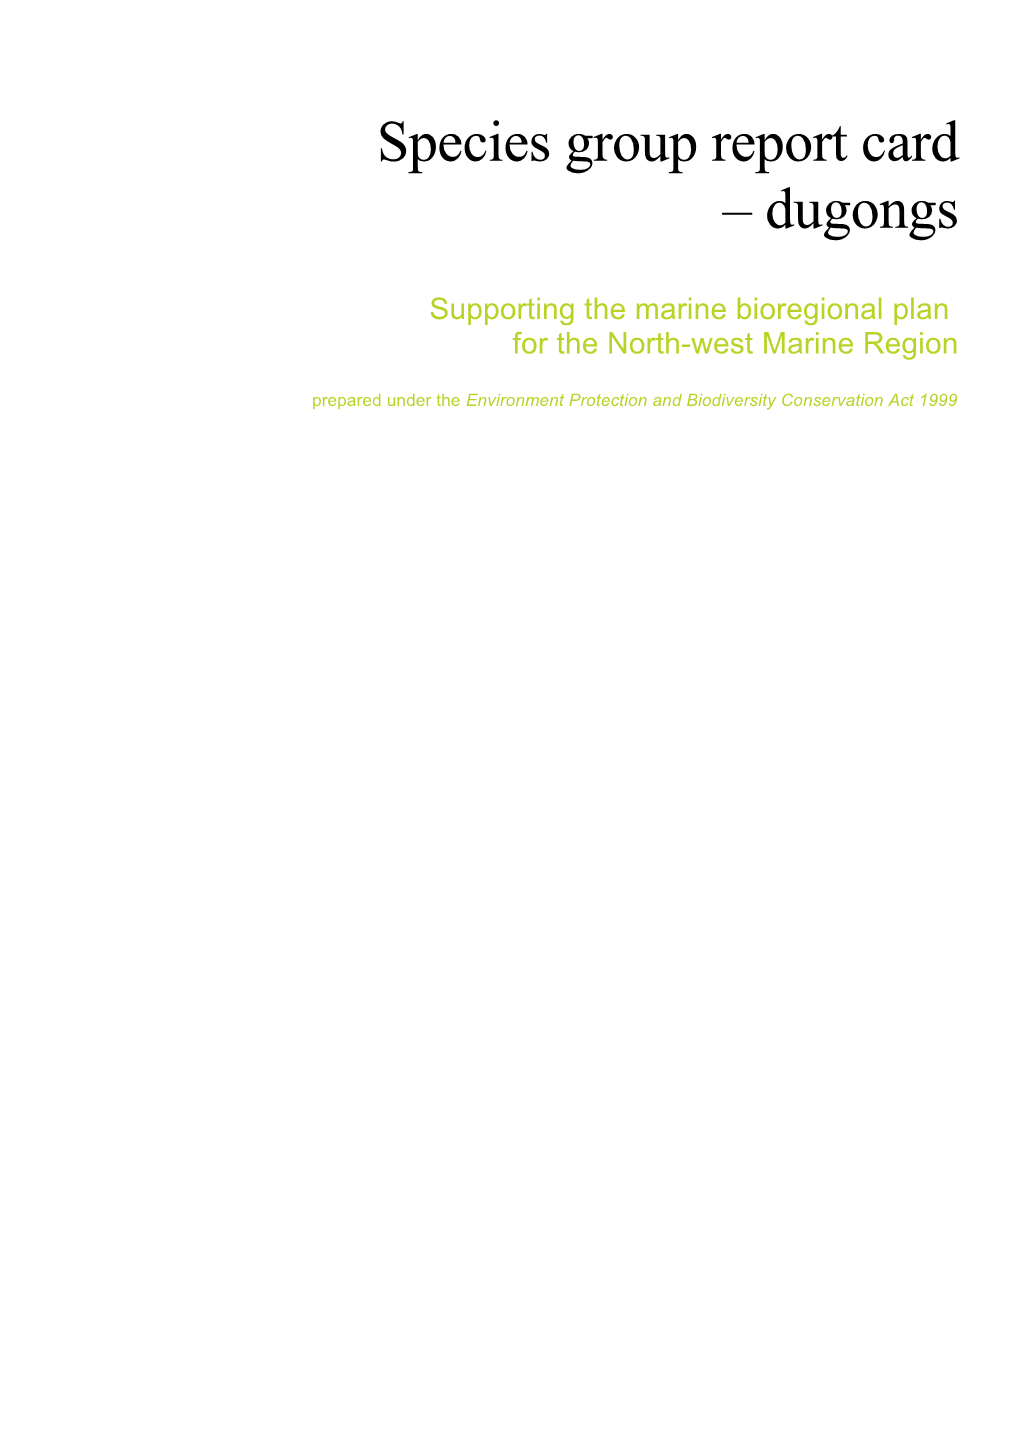 Species Group Report Card - Dugongs - Supporting the Marine Bioregional Plan for the North-West